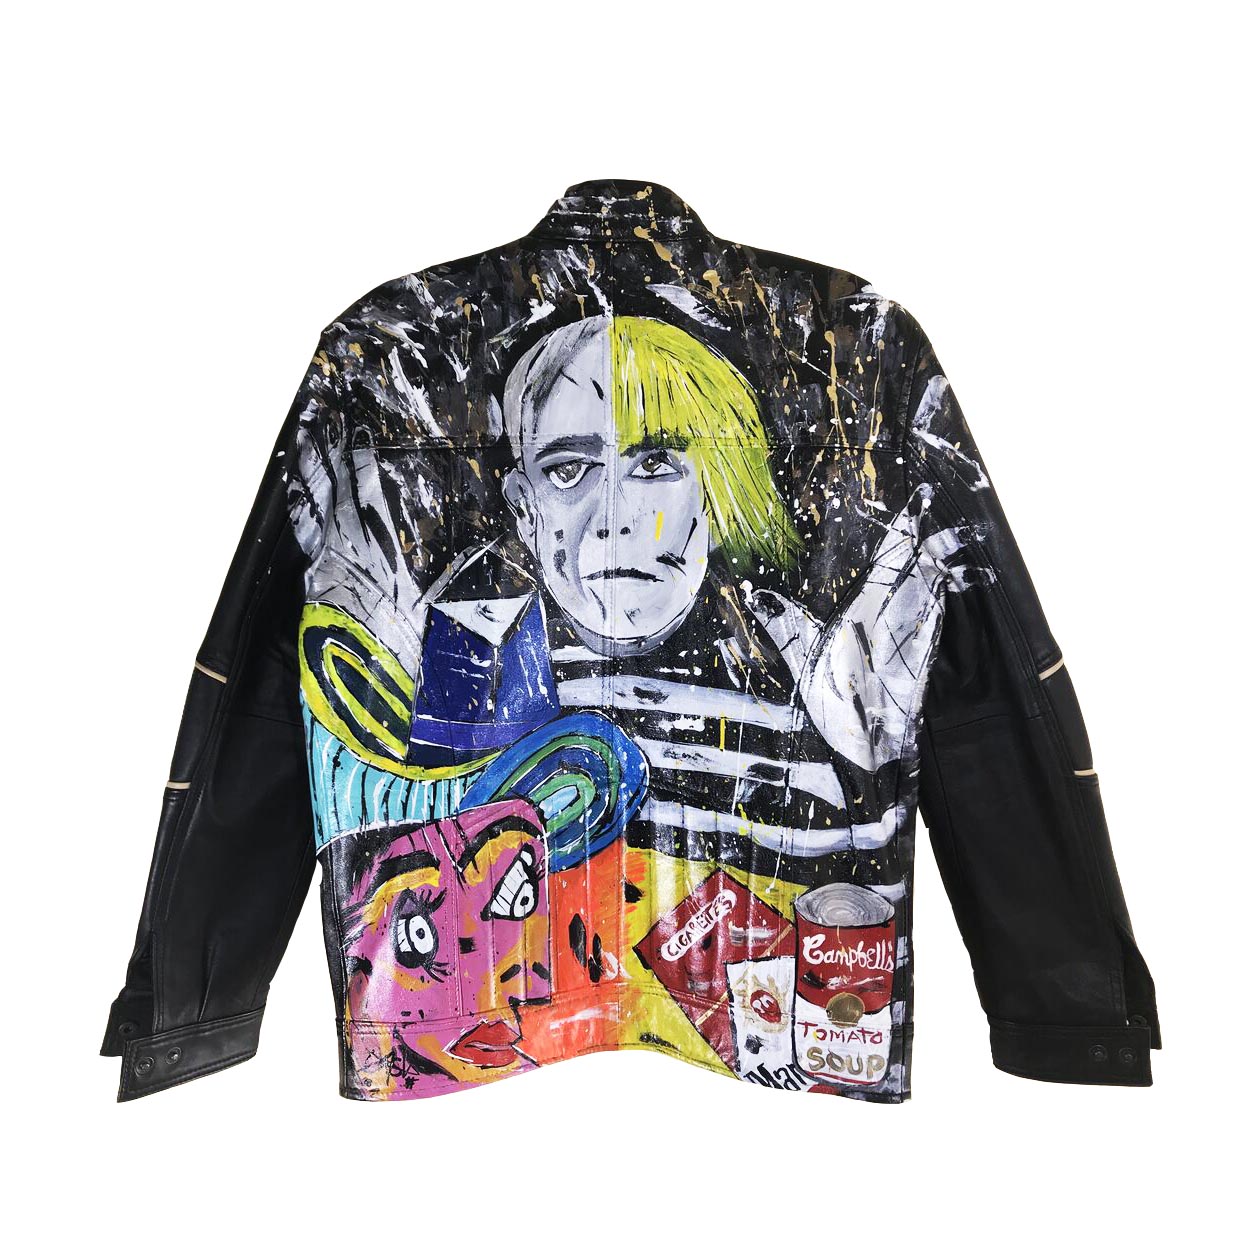 Hand painted Leather Jacket - “Pandy Picawar”